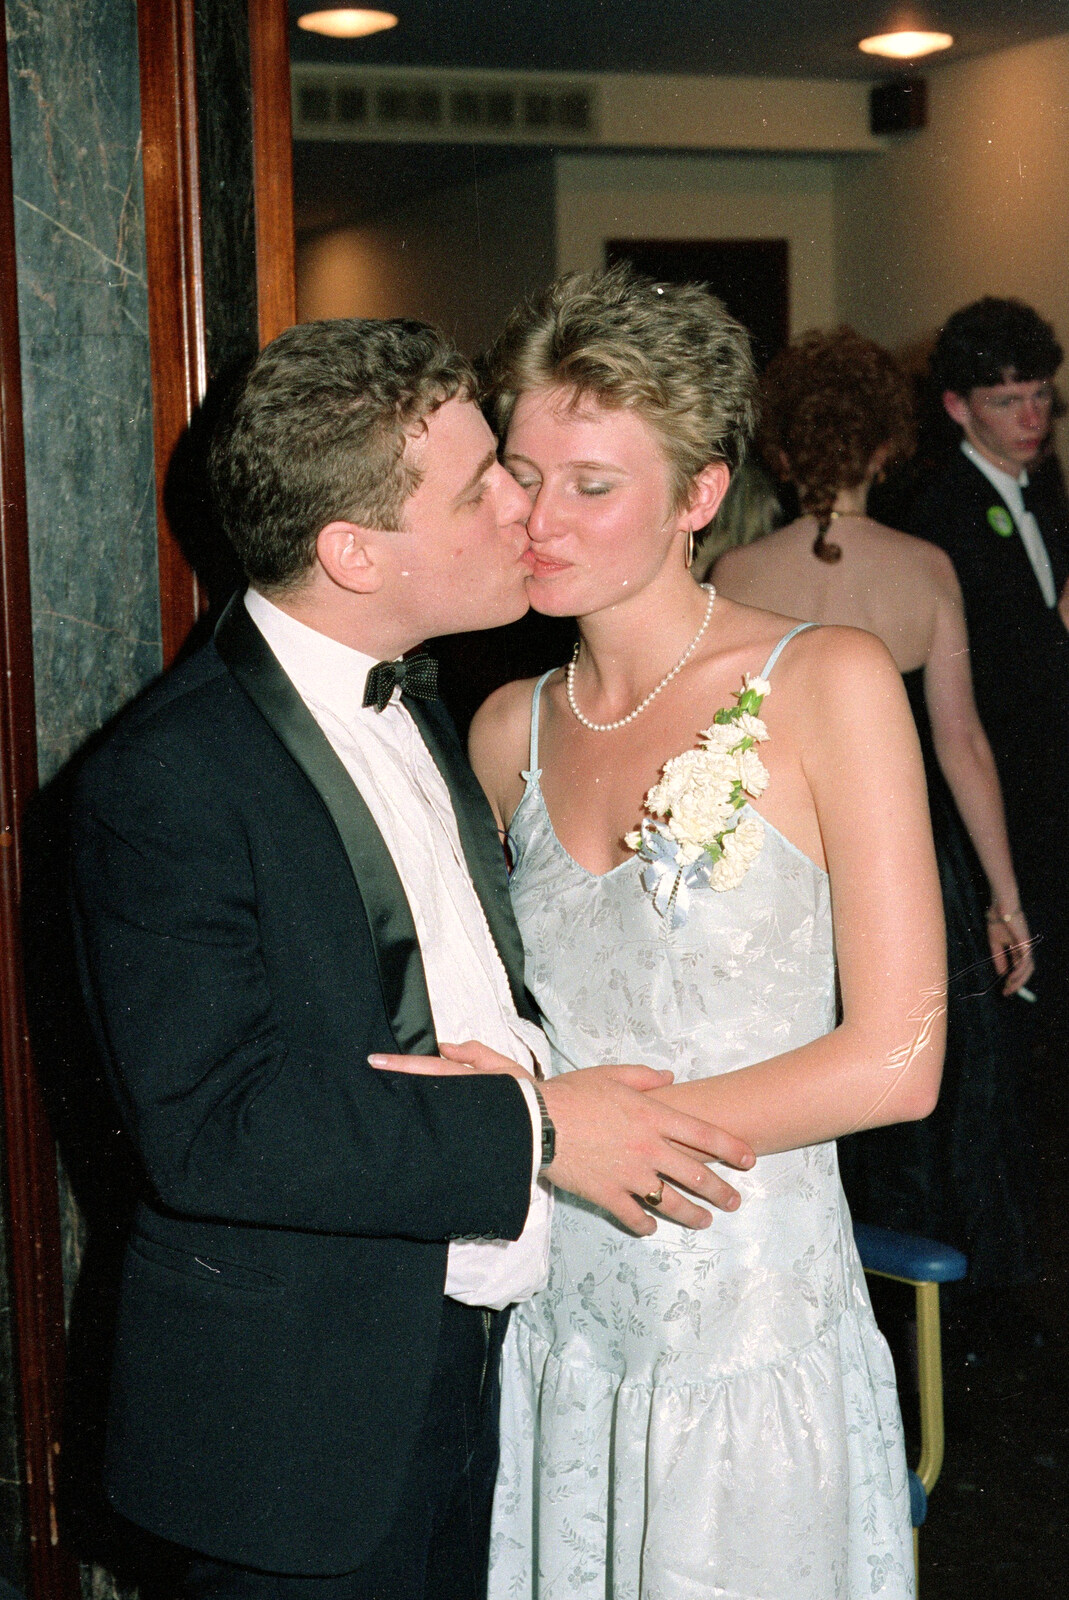 A snog moment from Uni: PPSU May Ball, The Guildhall, Plymouth - 4th May 1987